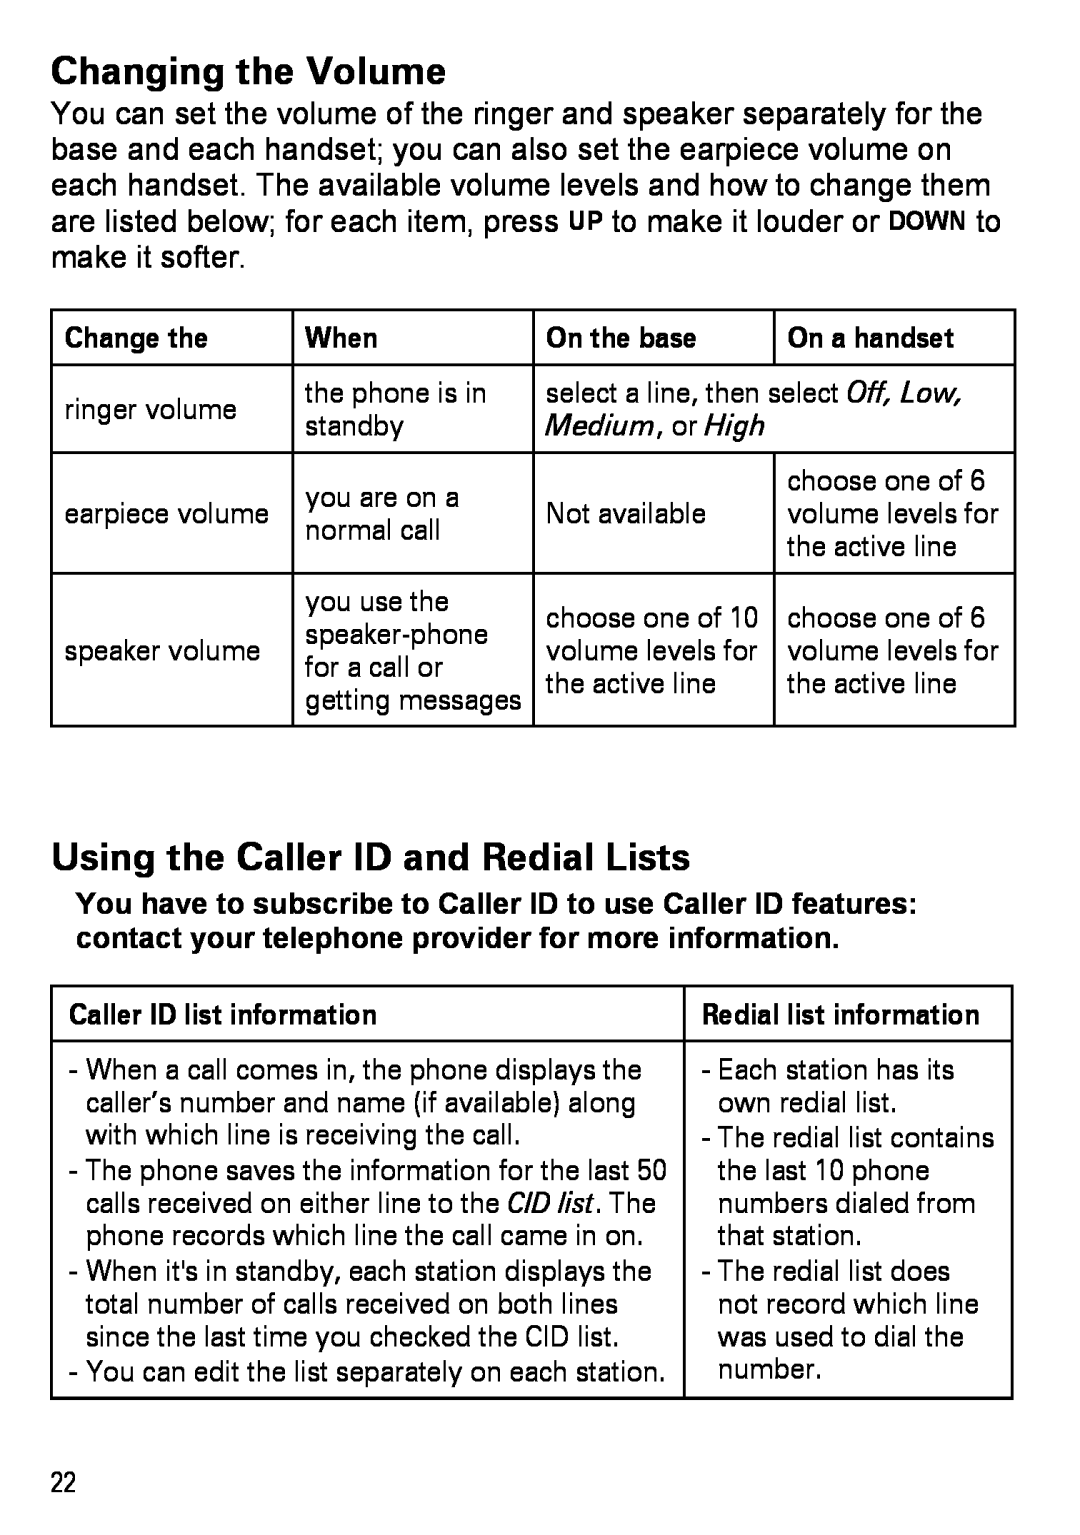 Uniden DECT4086-2 Changing the Volume, Using the Caller ID and Redial Lists, Change the, When, On the base, On a handset 